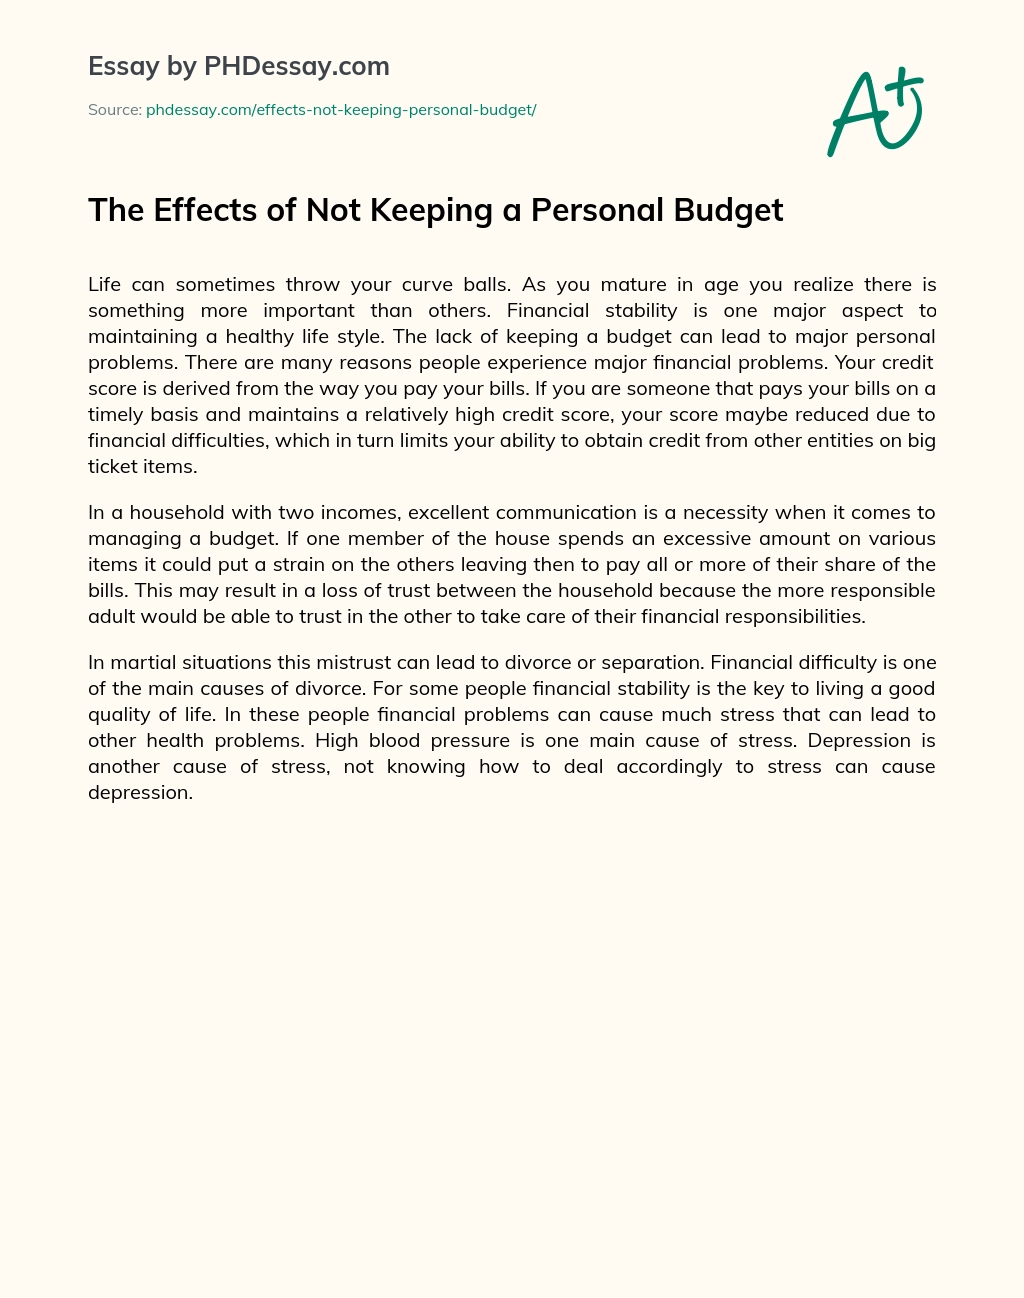 The Effects of Not Keeping a Personal Budget essay